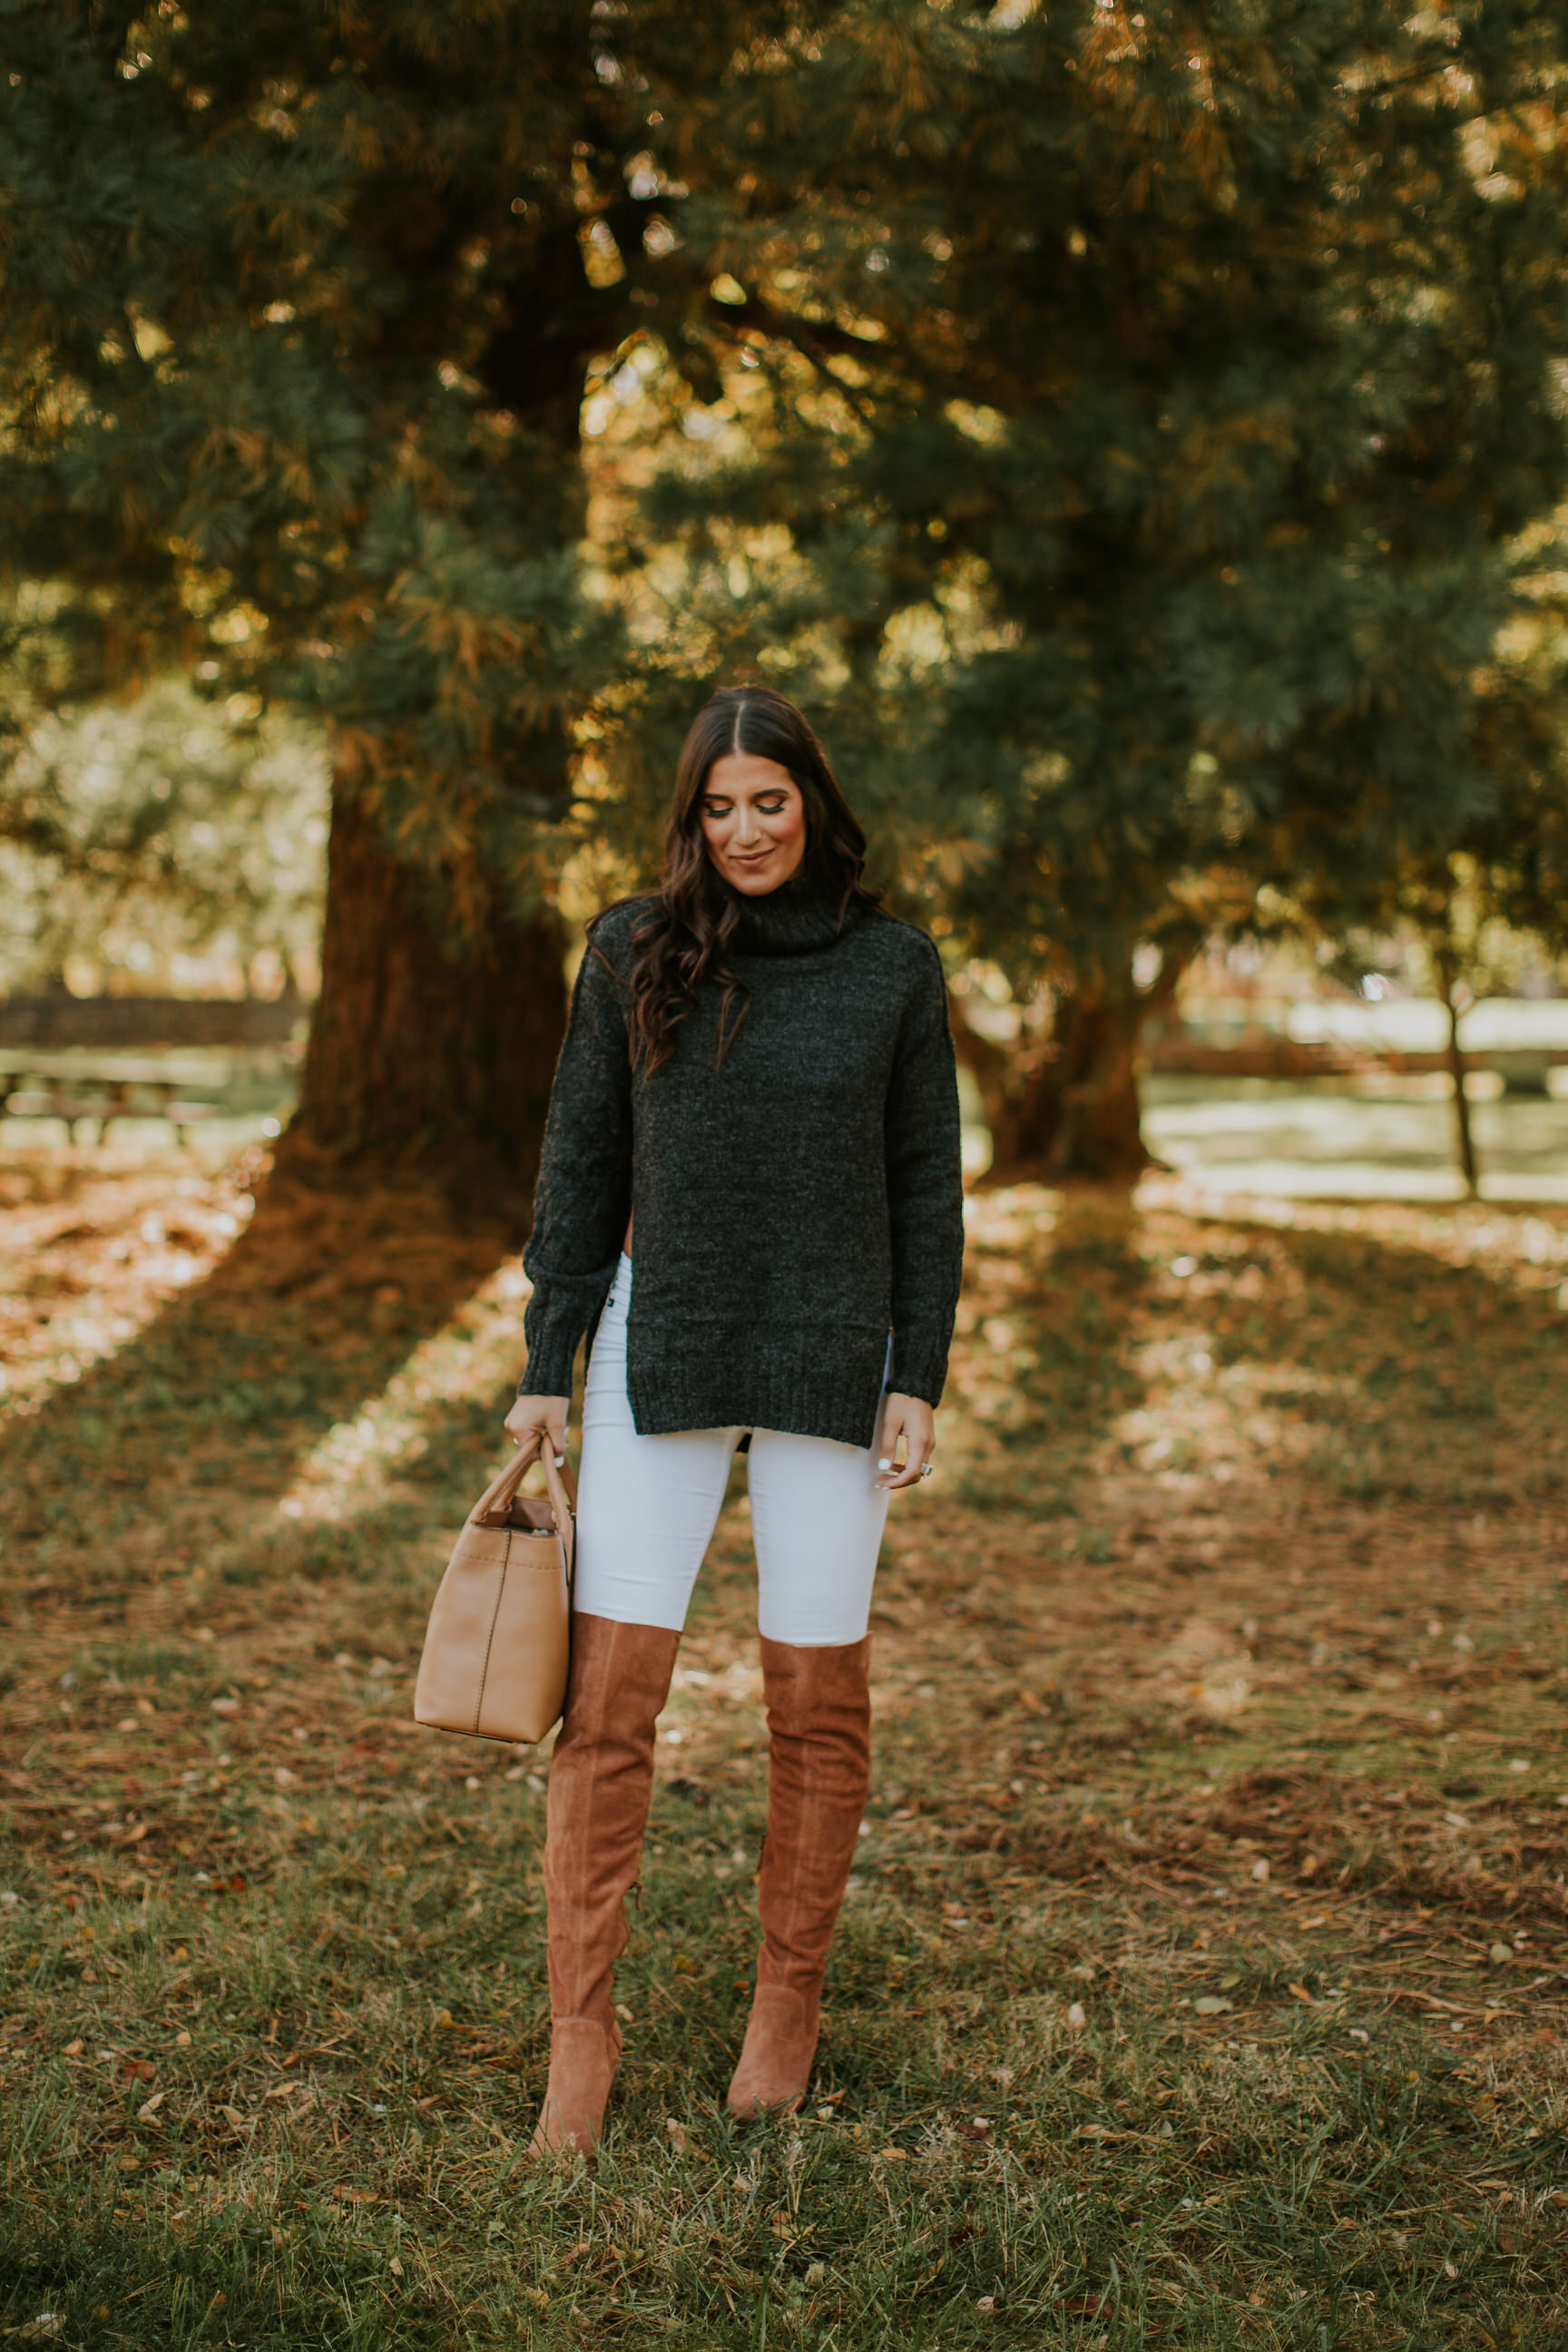 side split turtleneck, chunky turtleneck, fall style, fall fashion, fall inspo, fall inspiration, over the knee boots, charcoal sweater, holiday style, black friday sales, thanksgiving sales, black friday deals, black friday 2017, 2017 black friday sales, cyber monday sales // grace wainwright a southern drawl